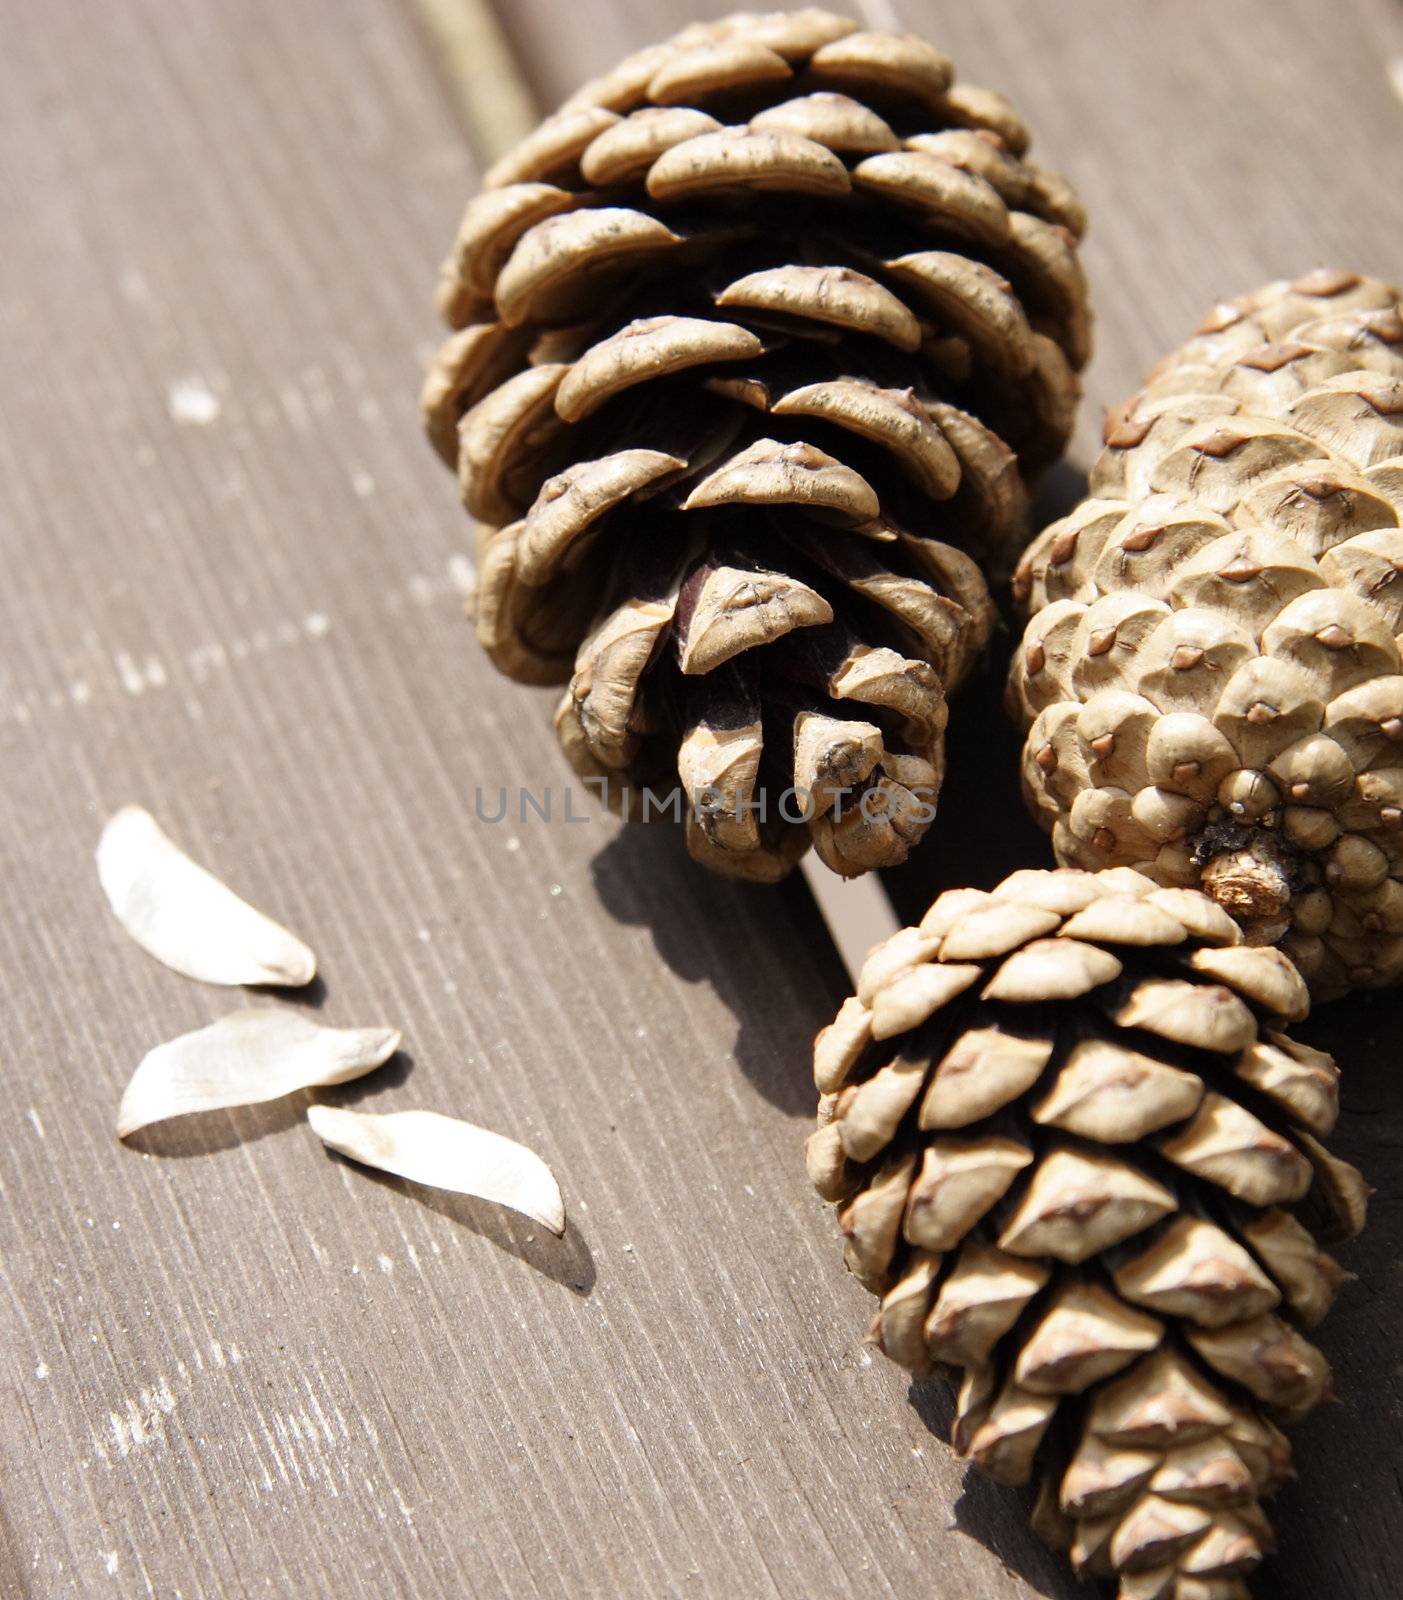 three fir cones and seeds by leafy